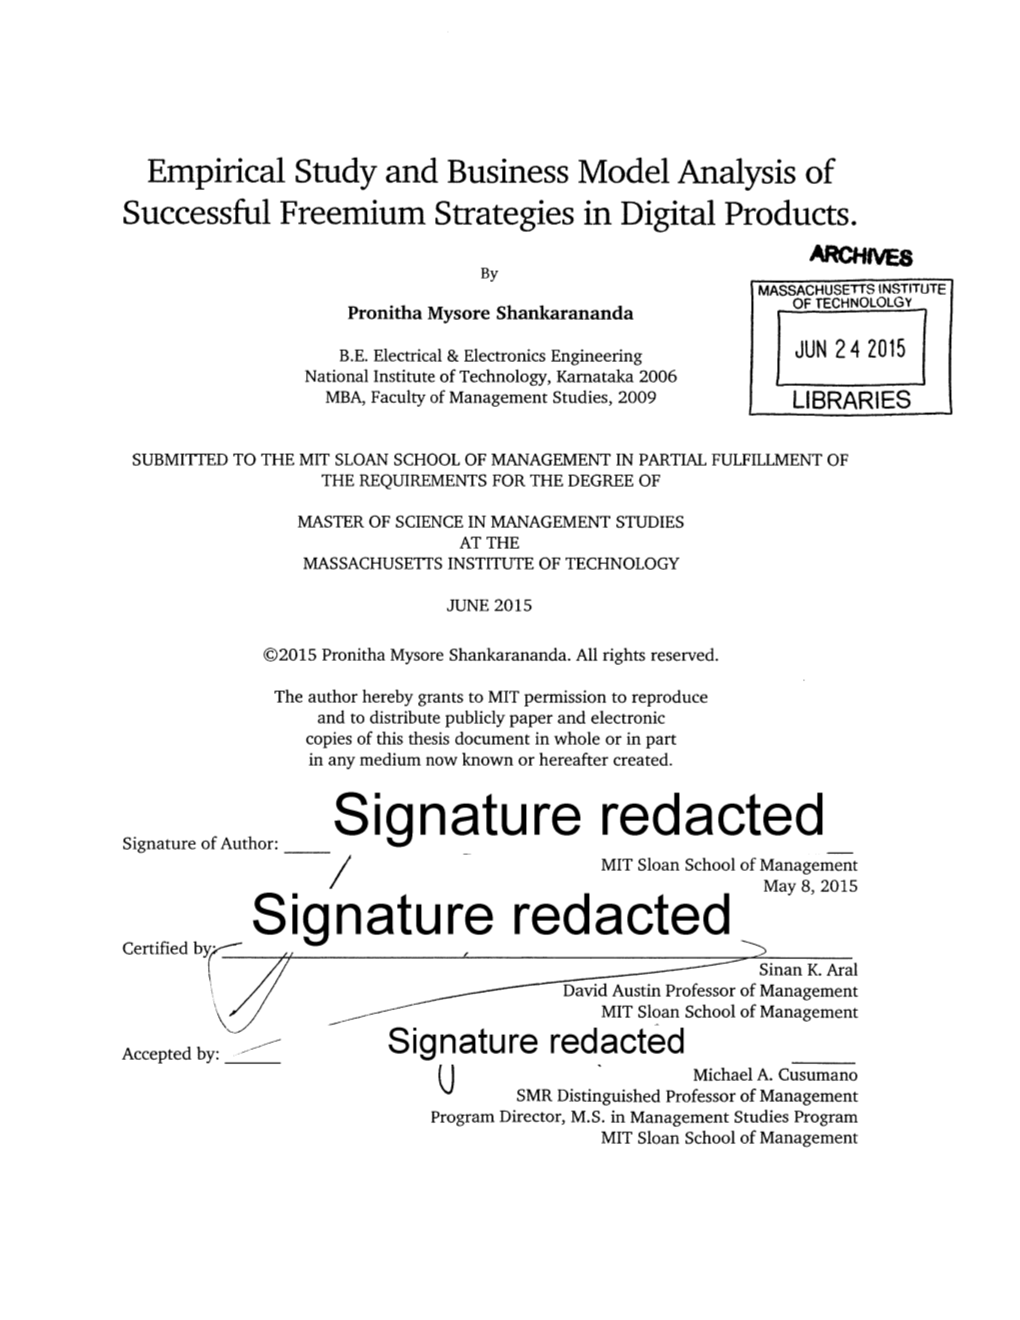 Signature Redacted Signature of Aut Hor: MIT Sloan School of Management May 8, 2015 Signature Redacted Certified By?___ -7 /1 Sinan K